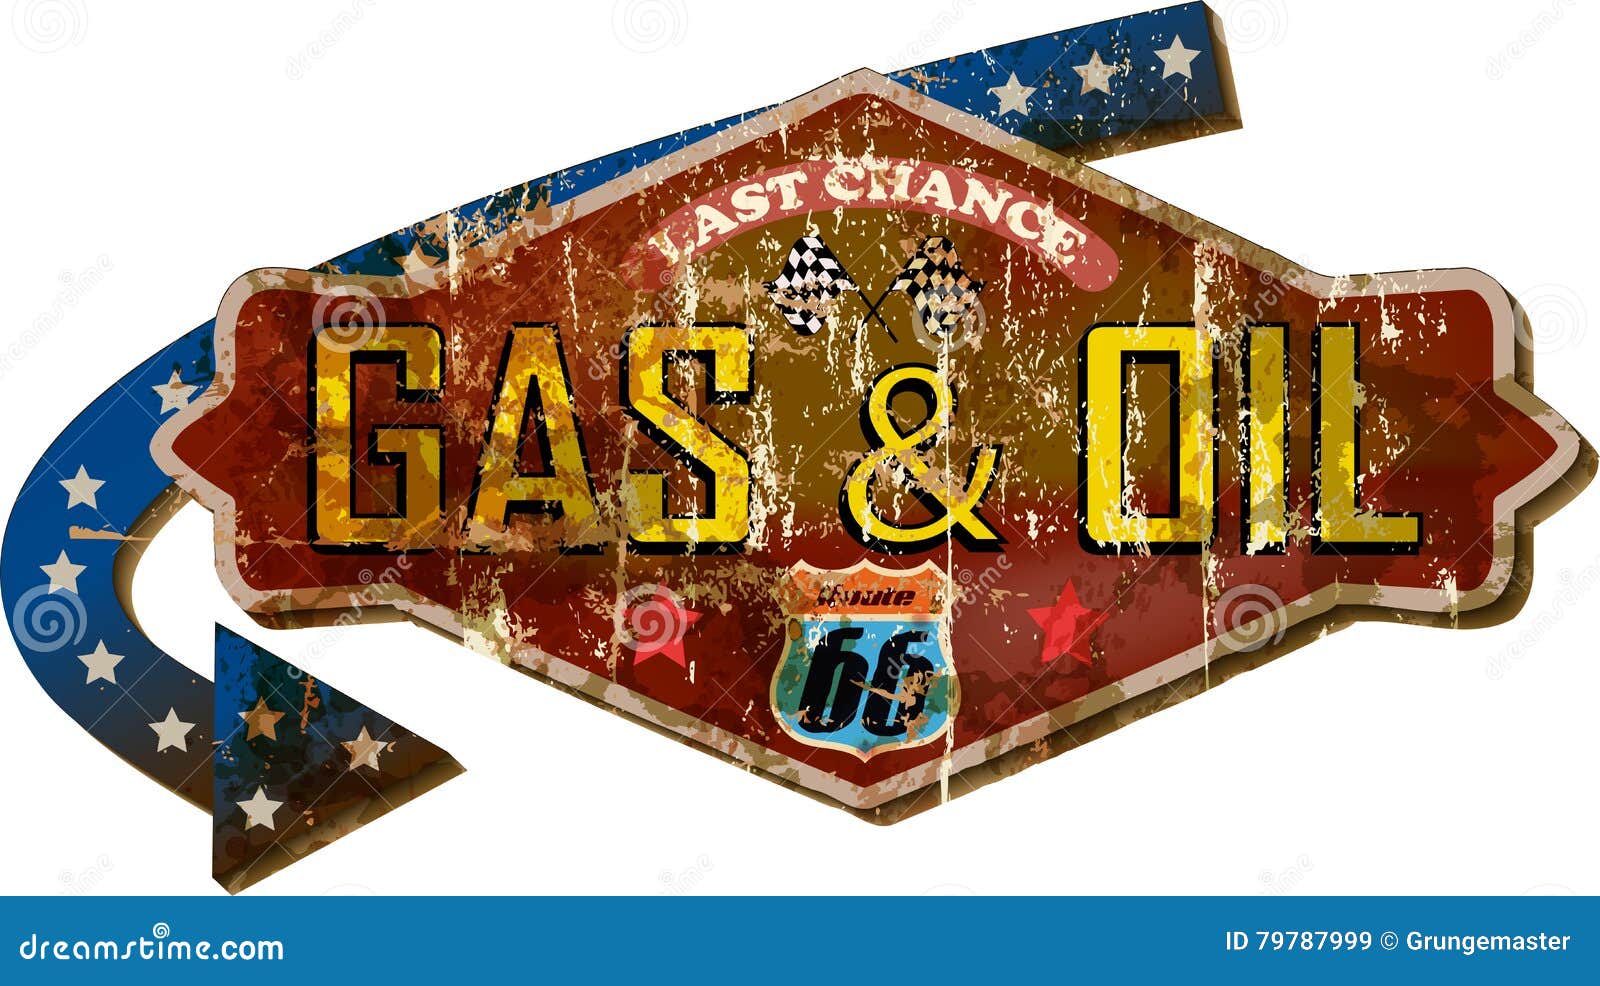 retro route 66 gas station street sign